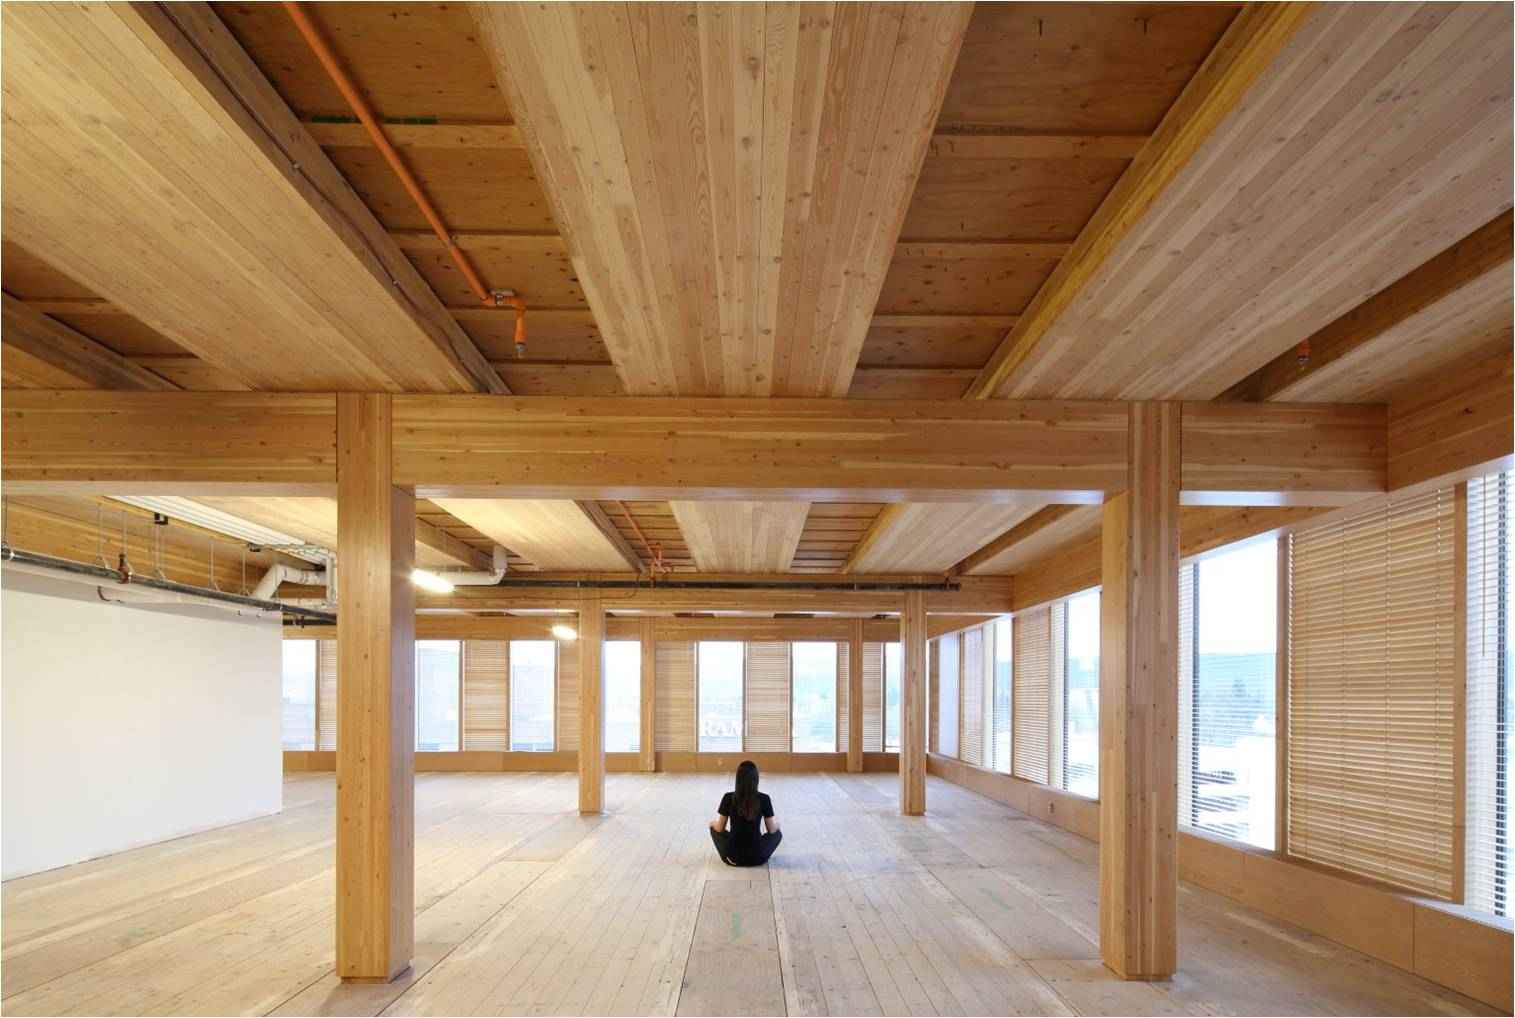 Structural Timber Beam